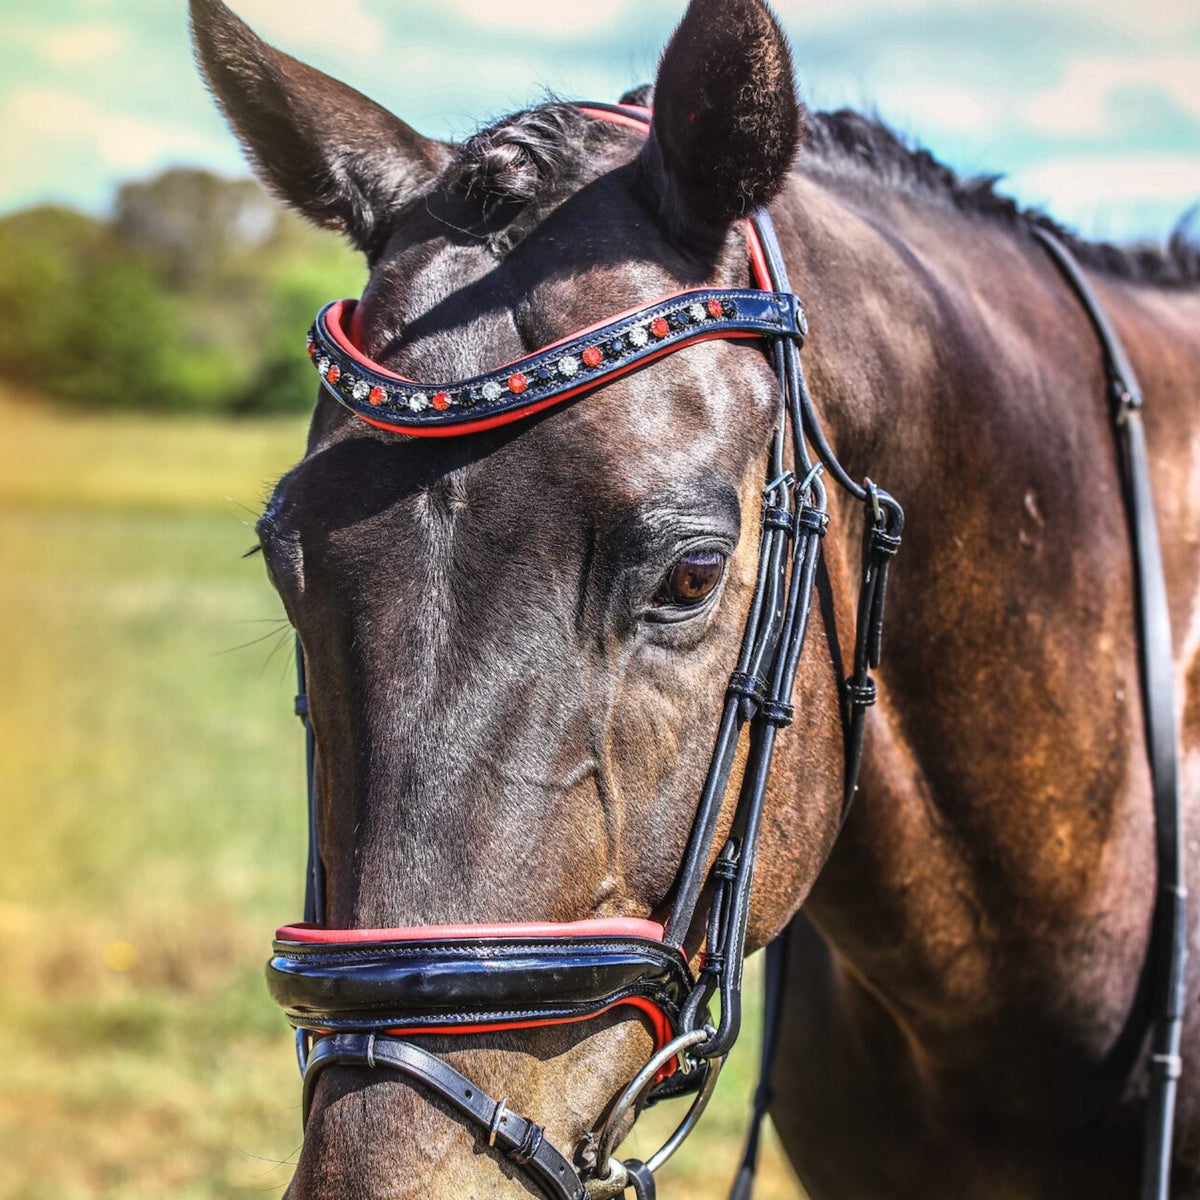 Sideview of horse wearing red and black bridle with black, red and clear crystals.